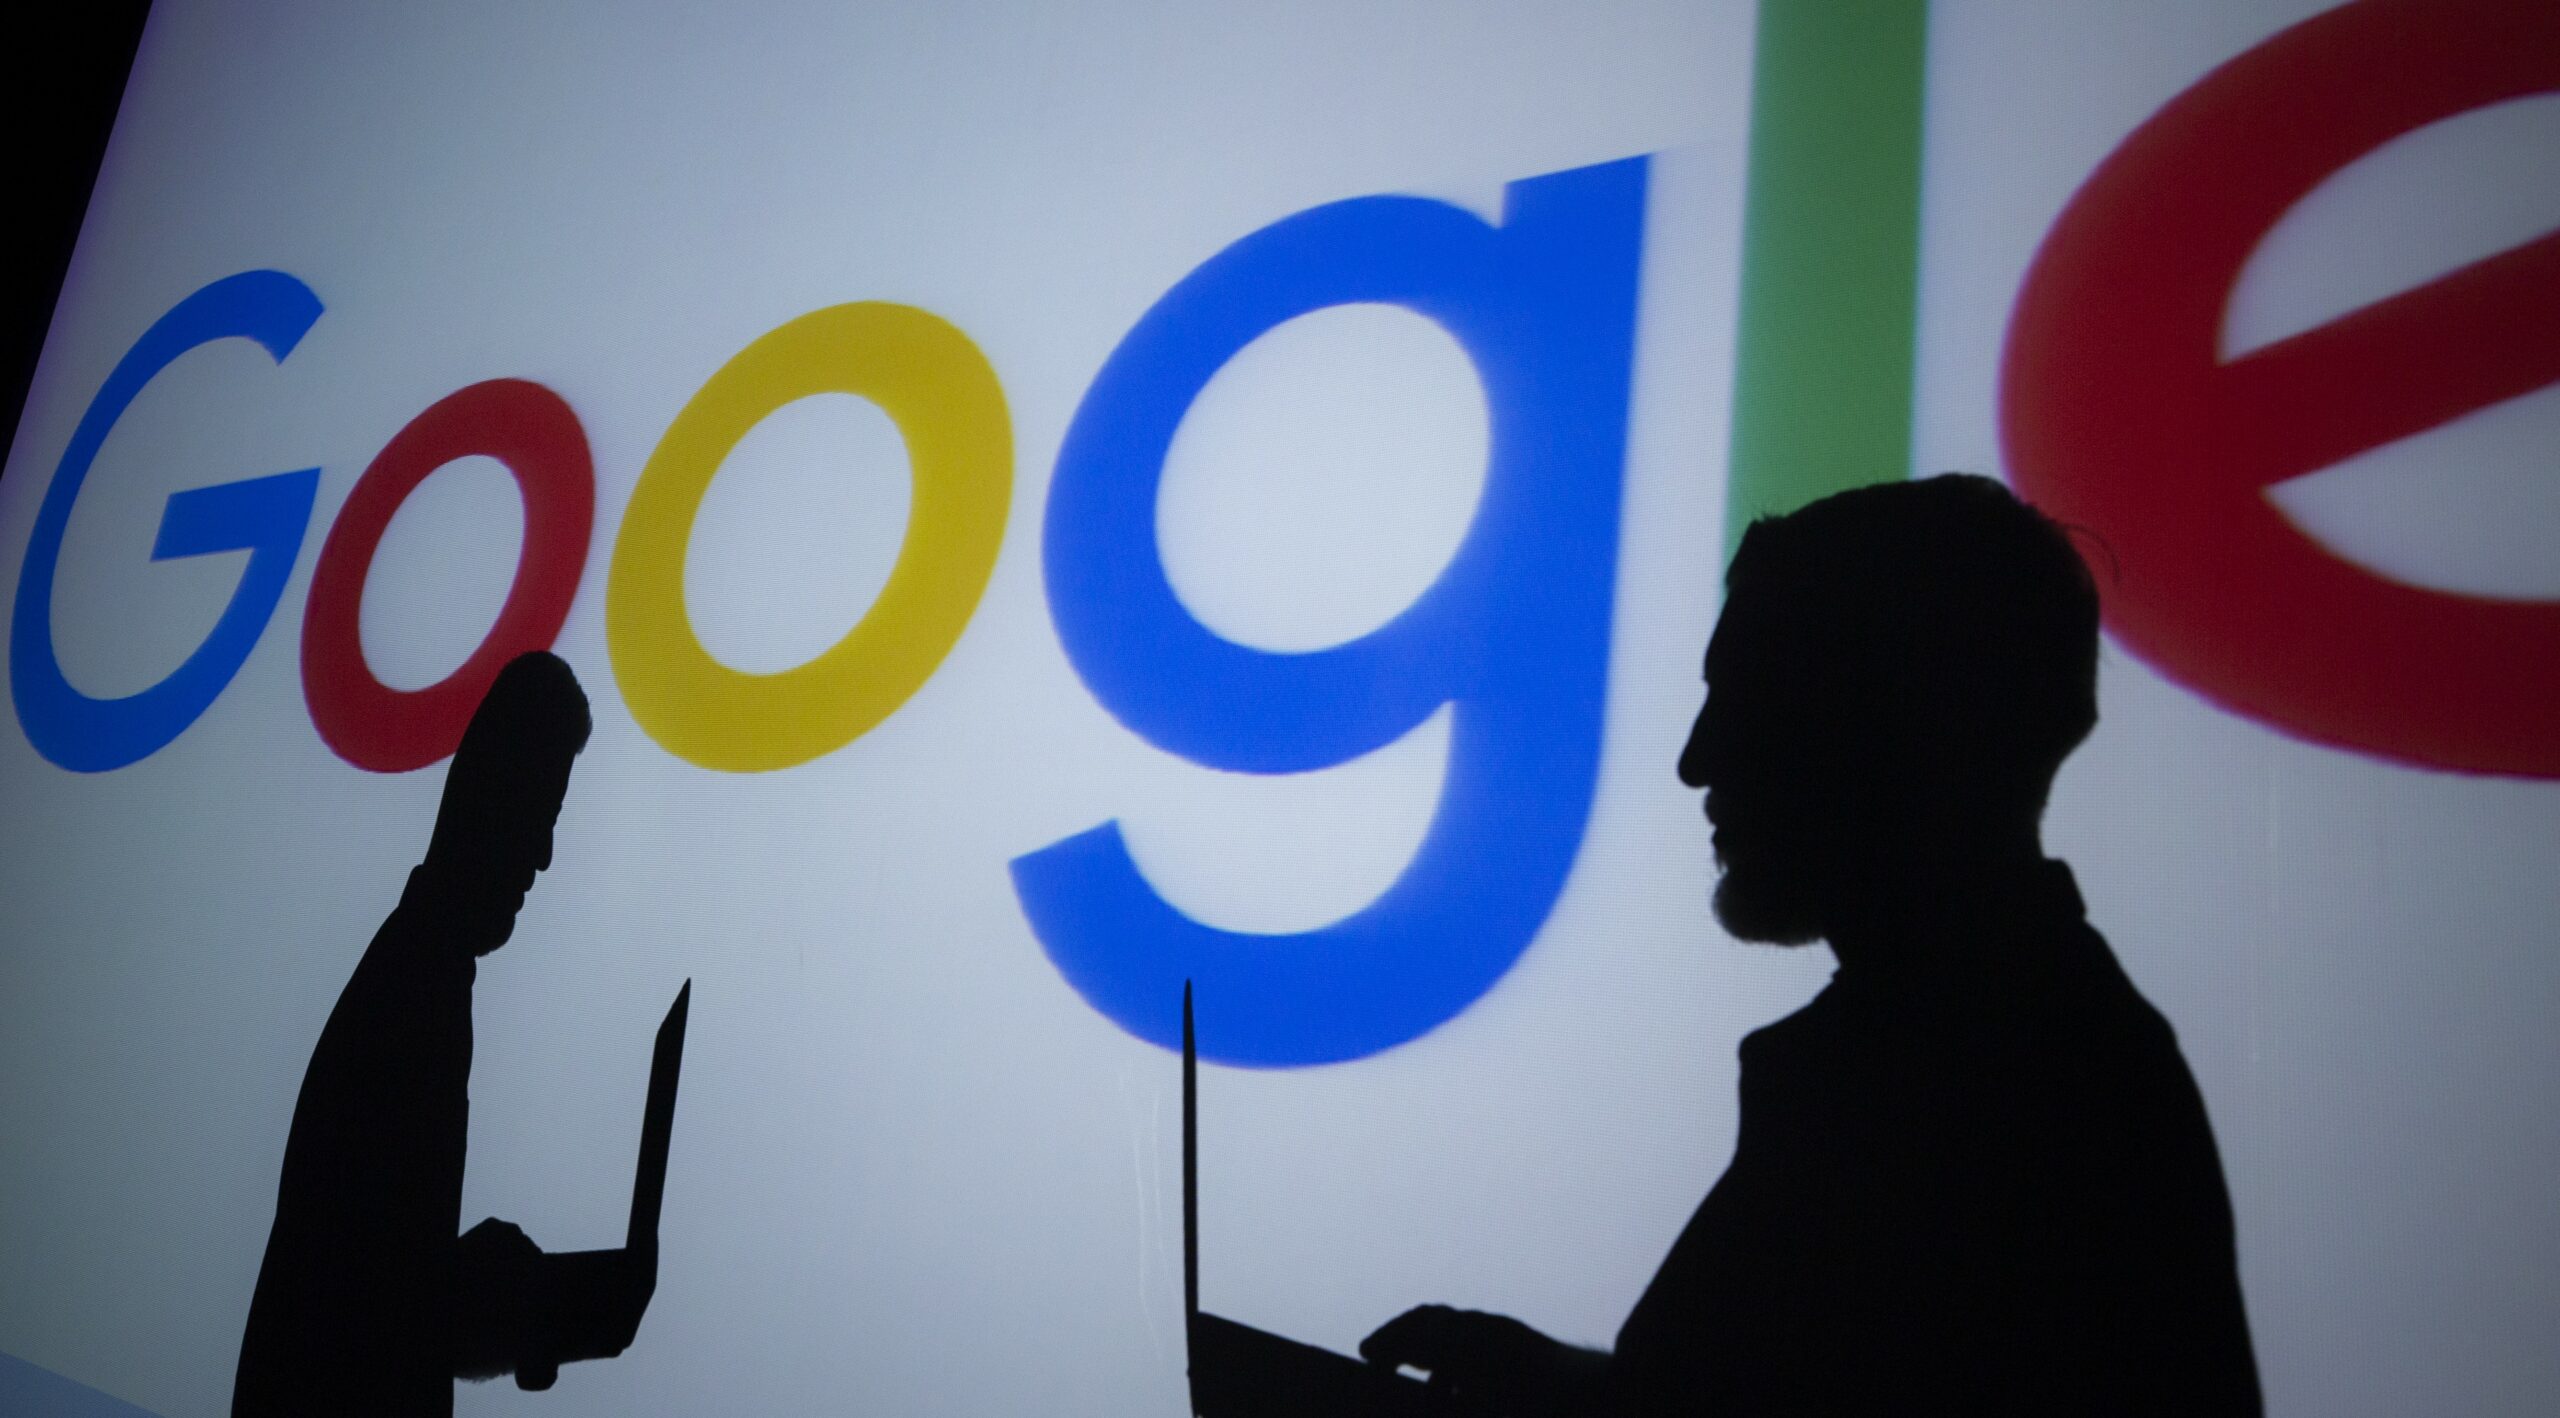 Silhouettes of people holding laptops are seen in front of the logo of 'Google' technology company on the 20th anniversary of Google.